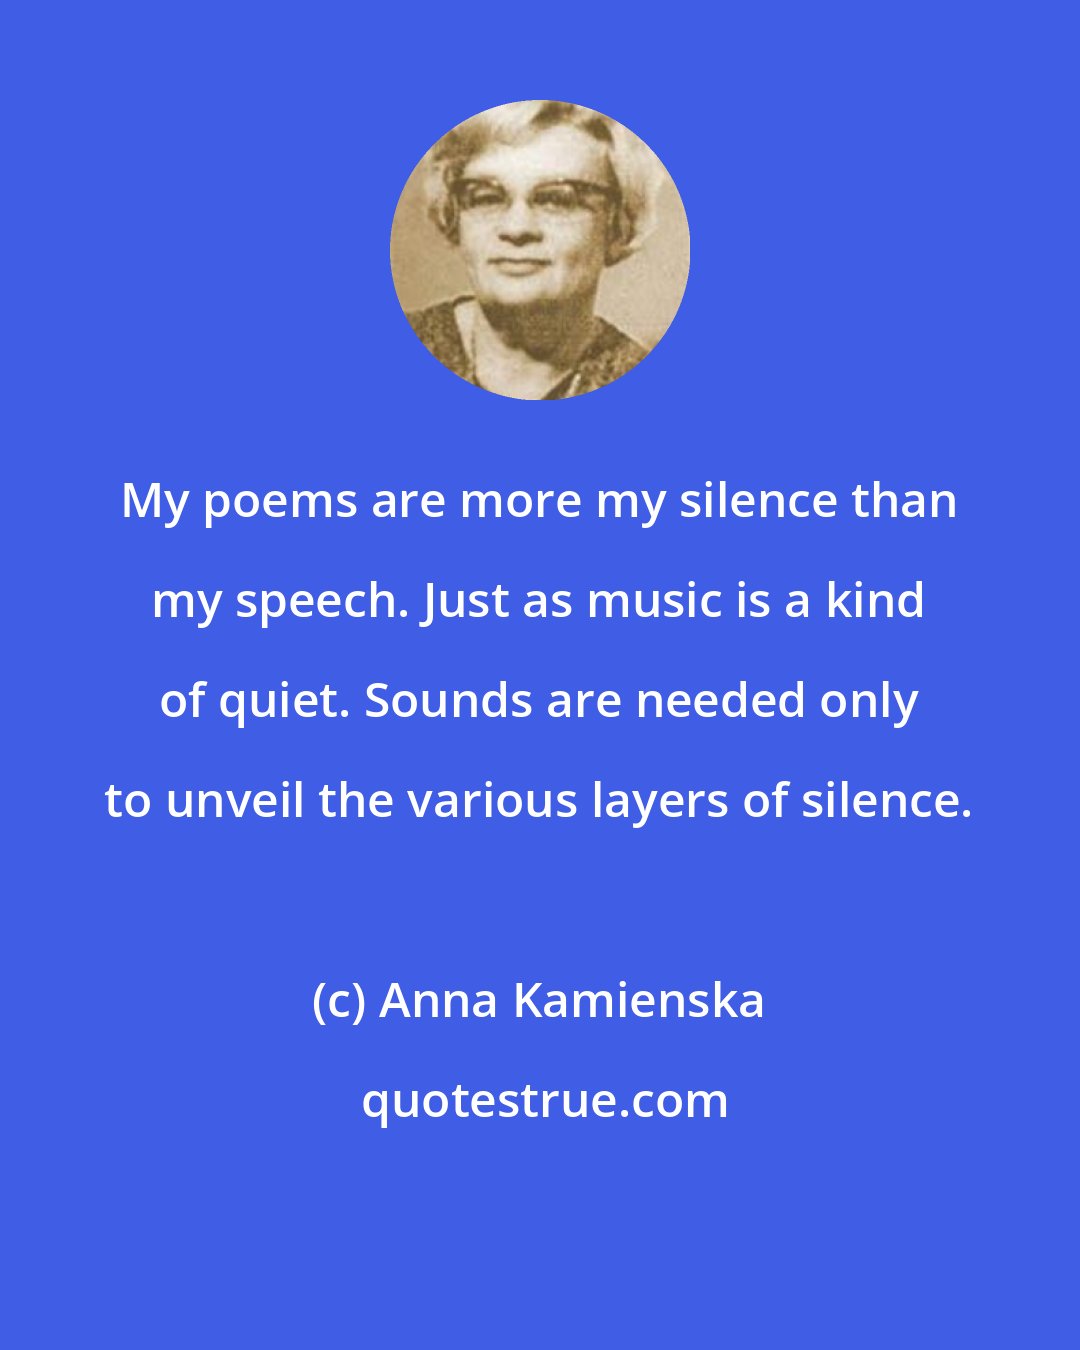 Anna Kamienska: My poems are more my silence than my speech. Just as music is a kind of quiet. Sounds are needed only to unveil the various layers of silence.